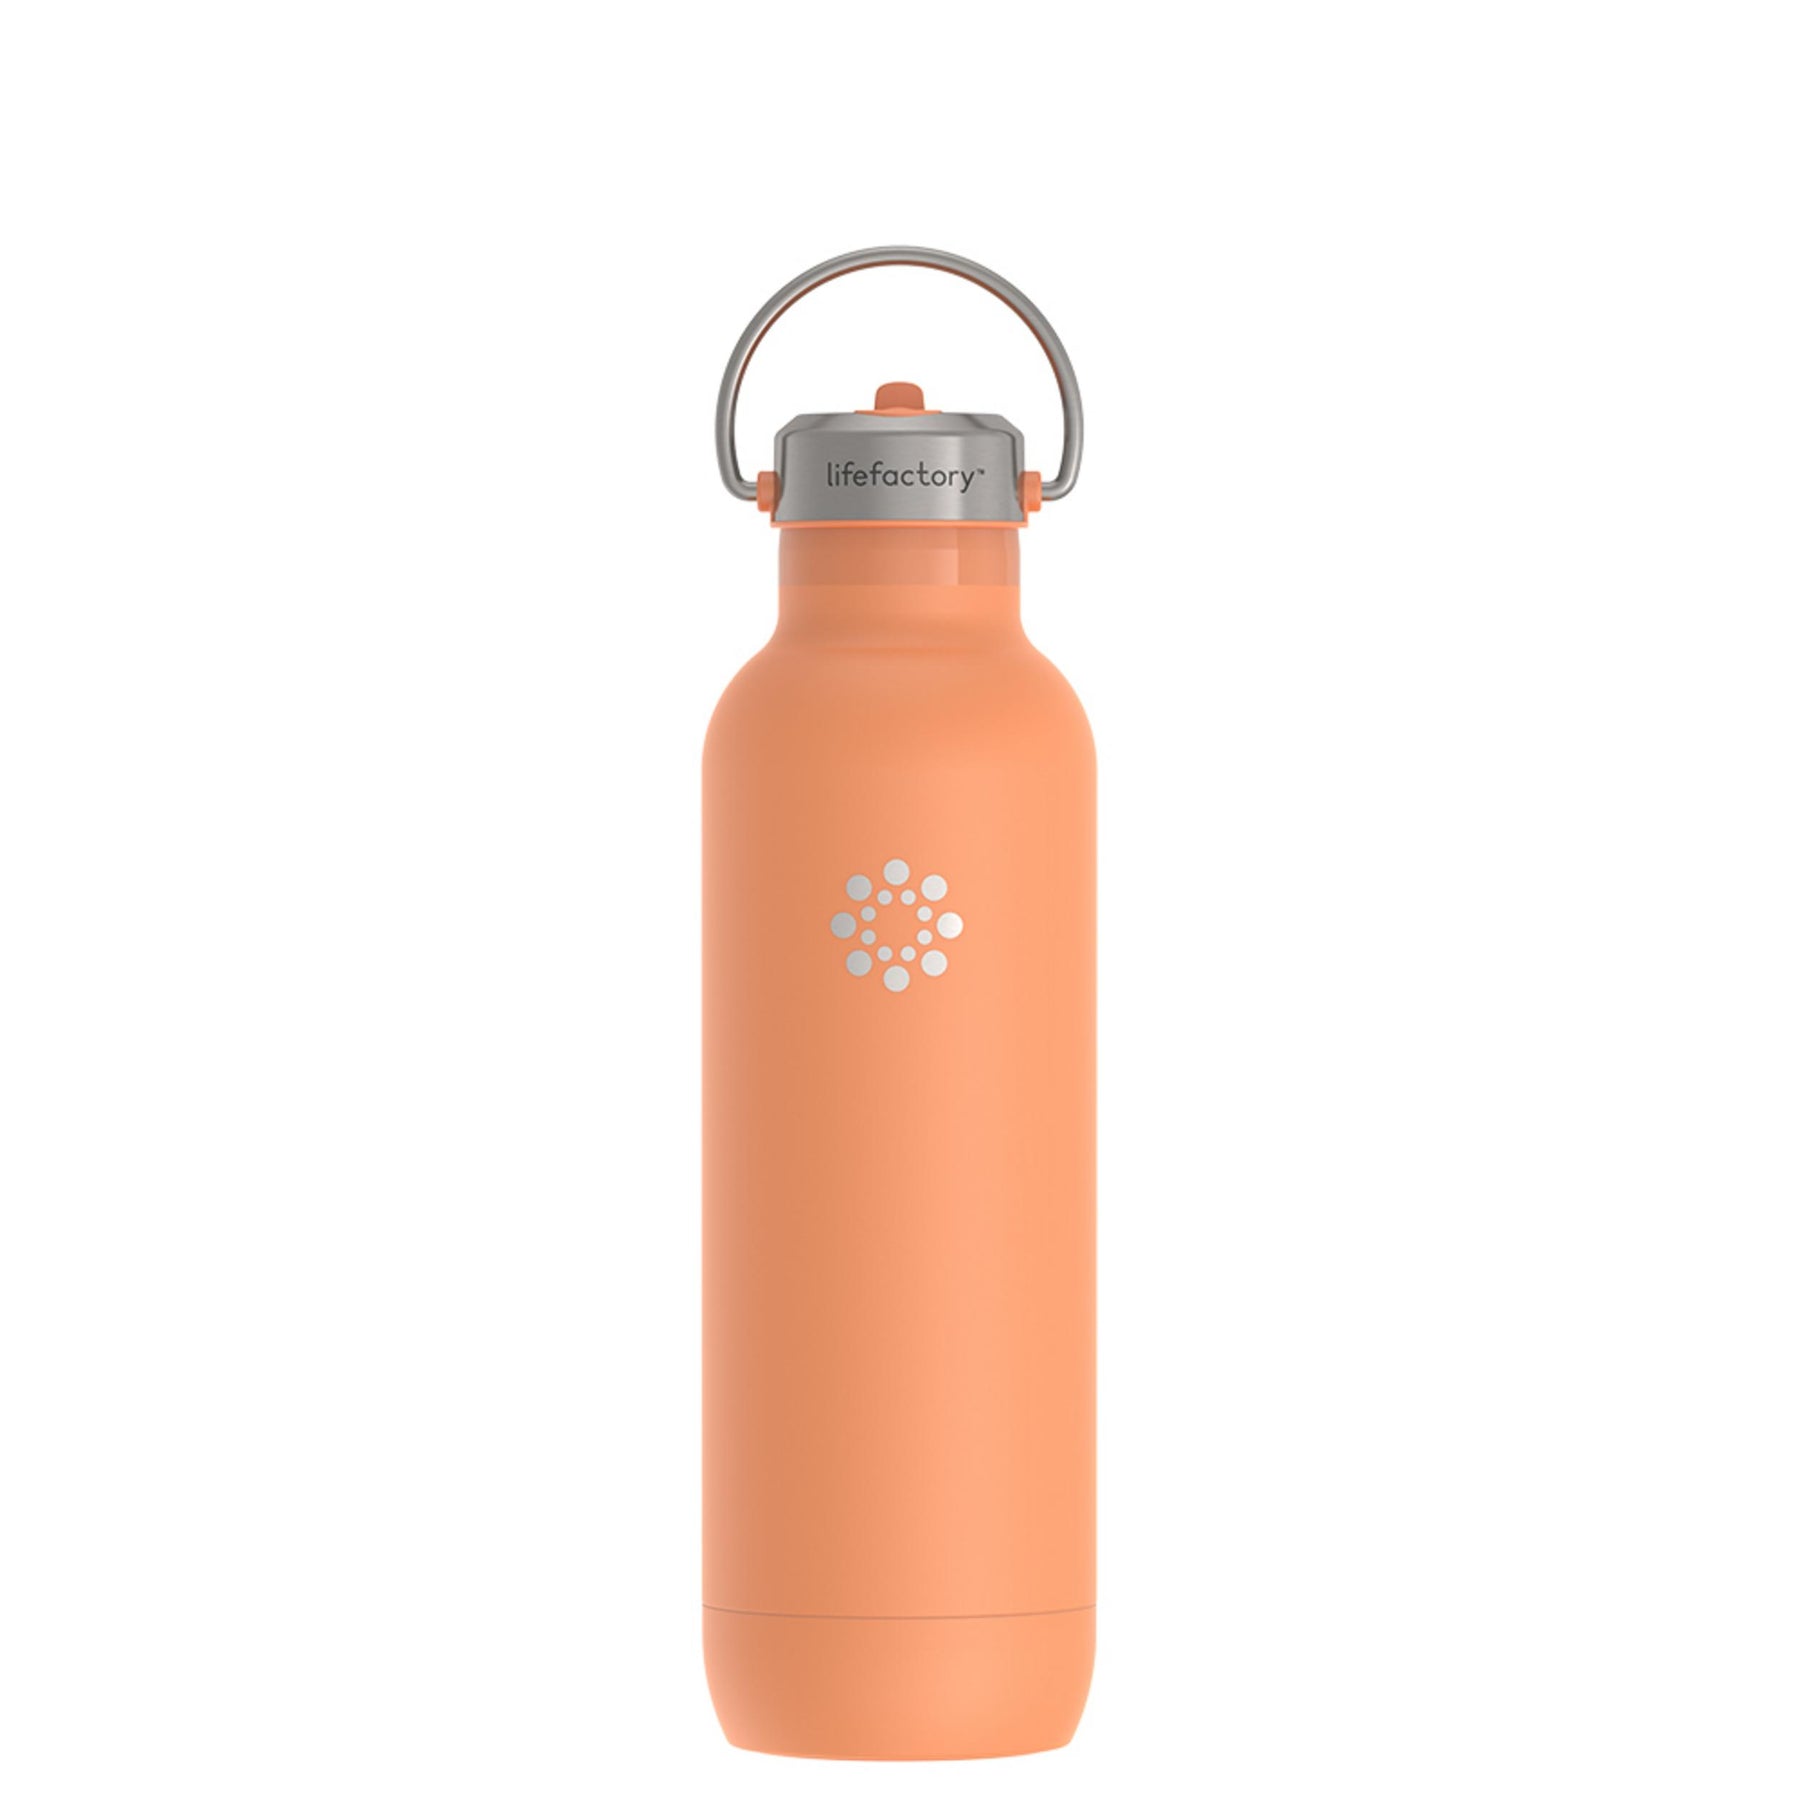 Thermos Icon Series Stainless Steel Vacuum Insulated Water Bottle w/ Spout, Stainless Steel, 24oz